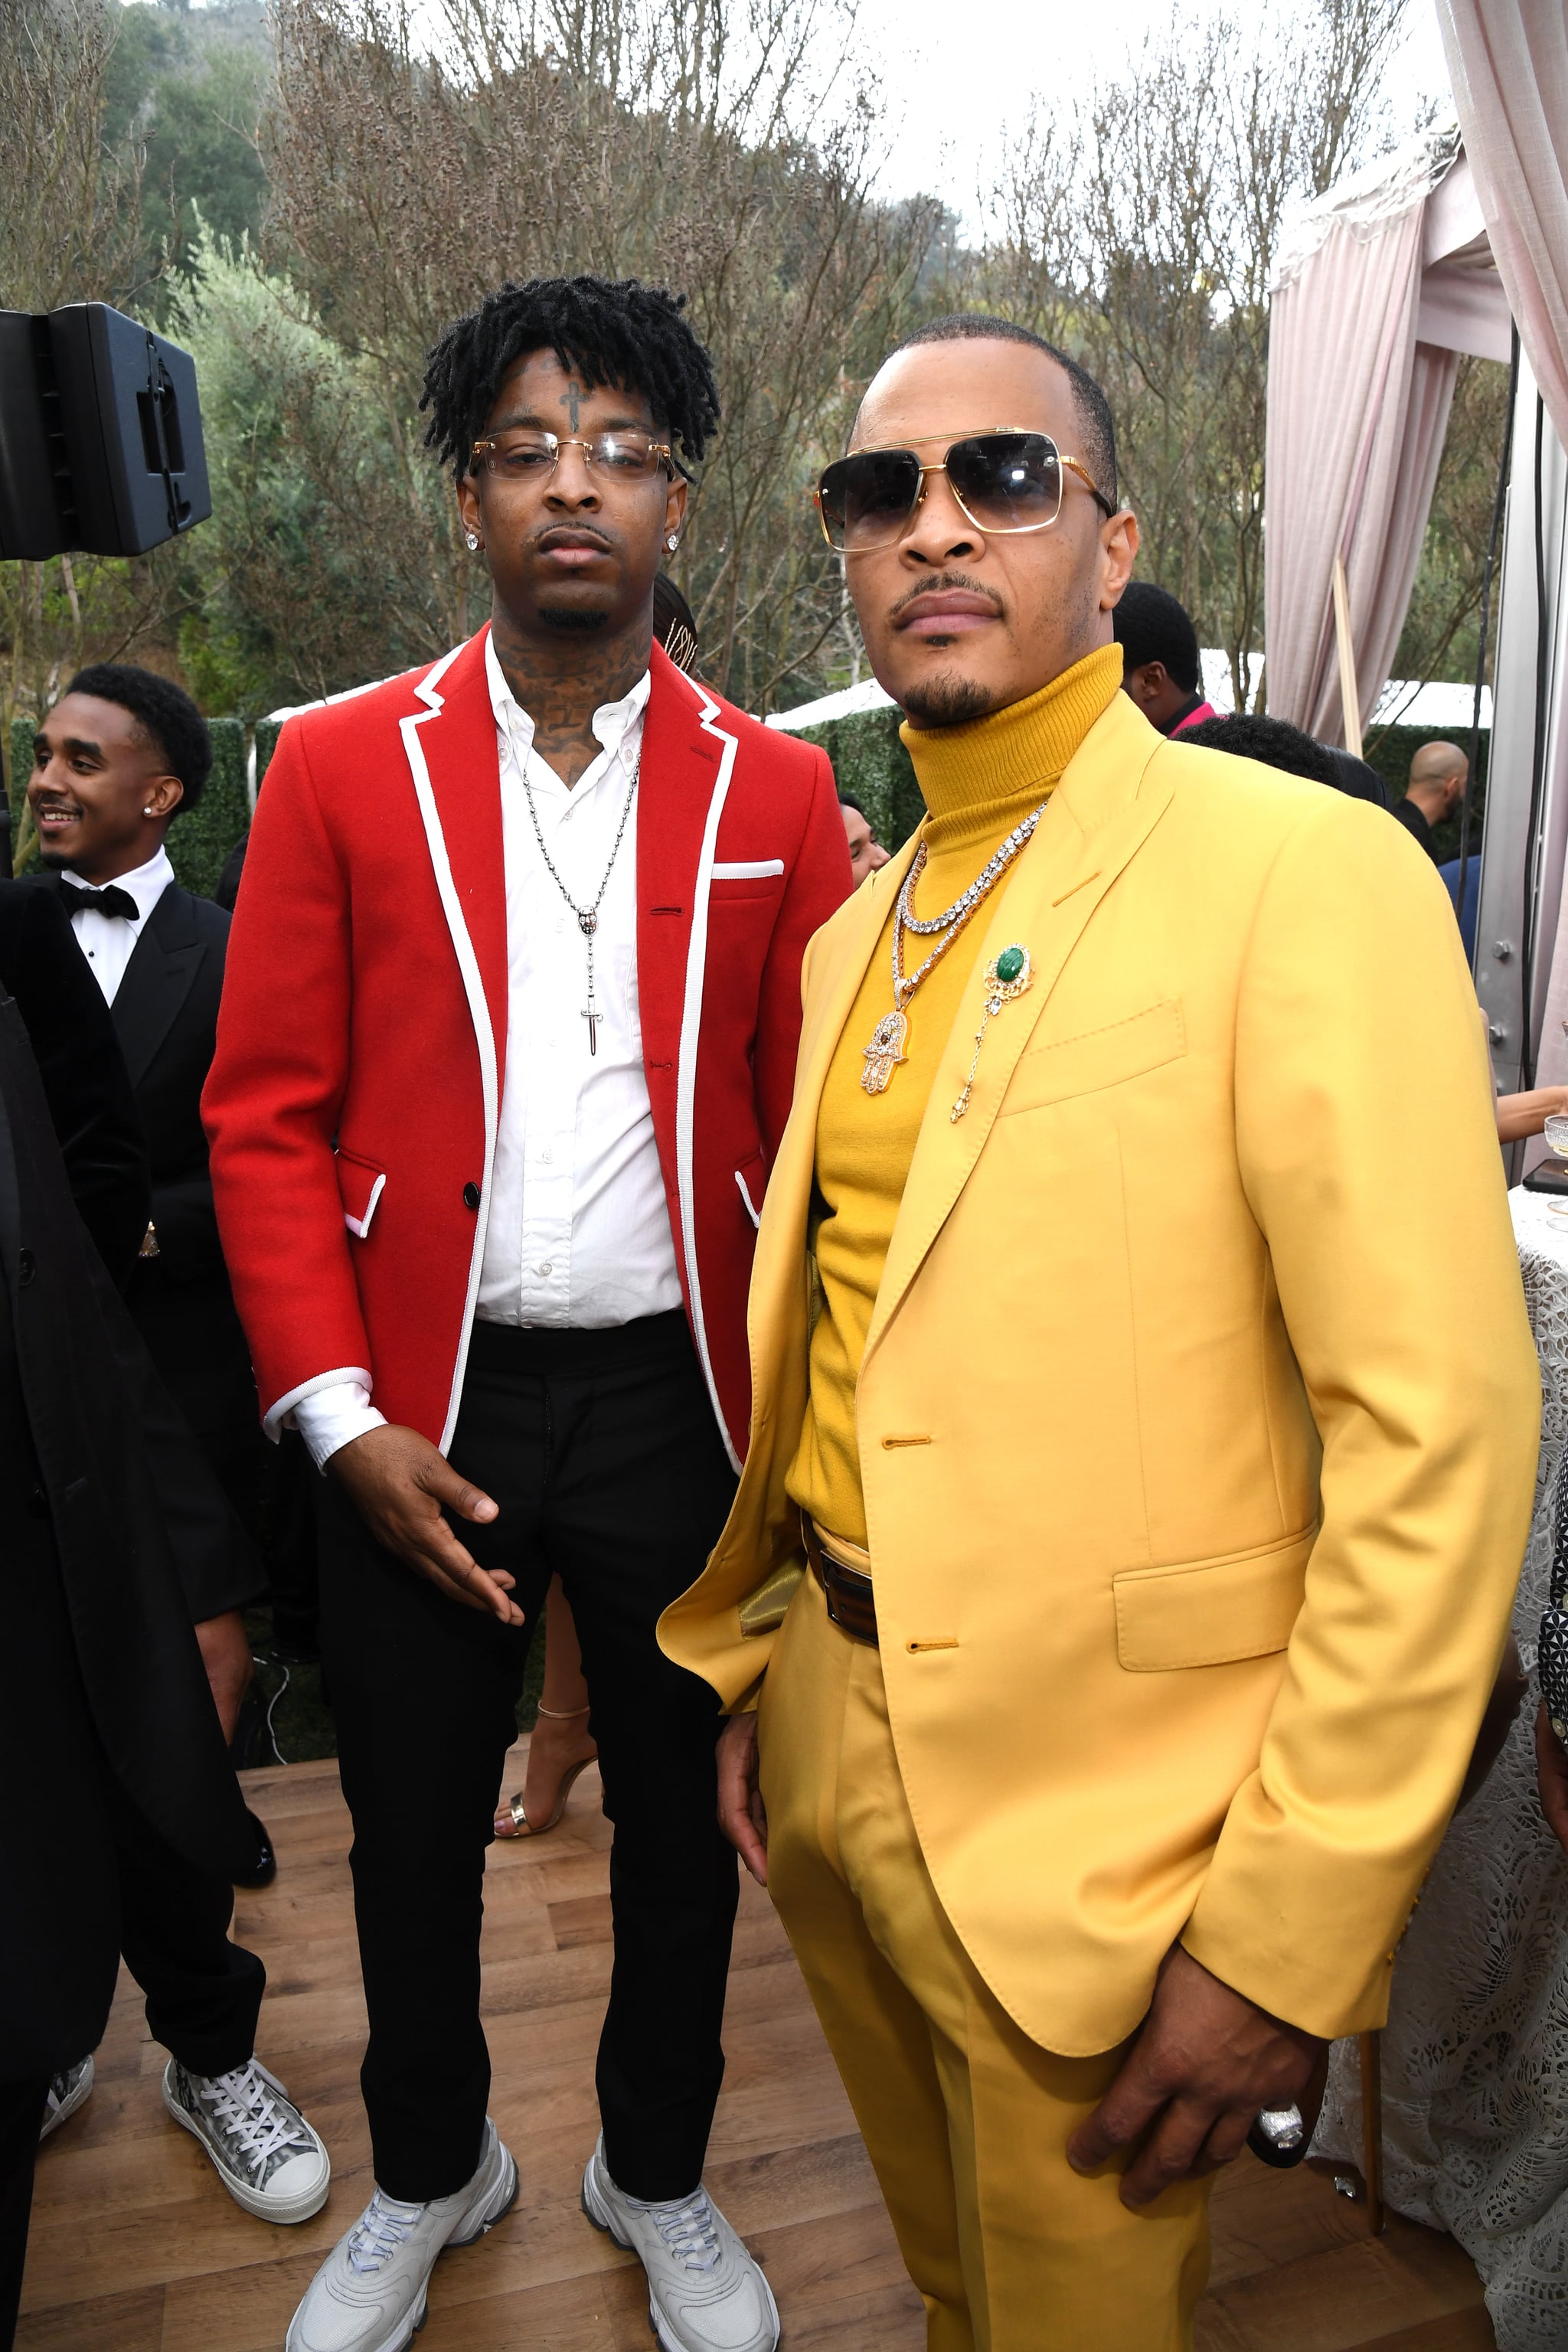 21 Savage and T.I. at the 2020 Roc Nation Brunch in LA, Seeing Stars!  Beyoncé and JAY-Z's Roc Nation Brunch Brings Out Some of Music's Finest